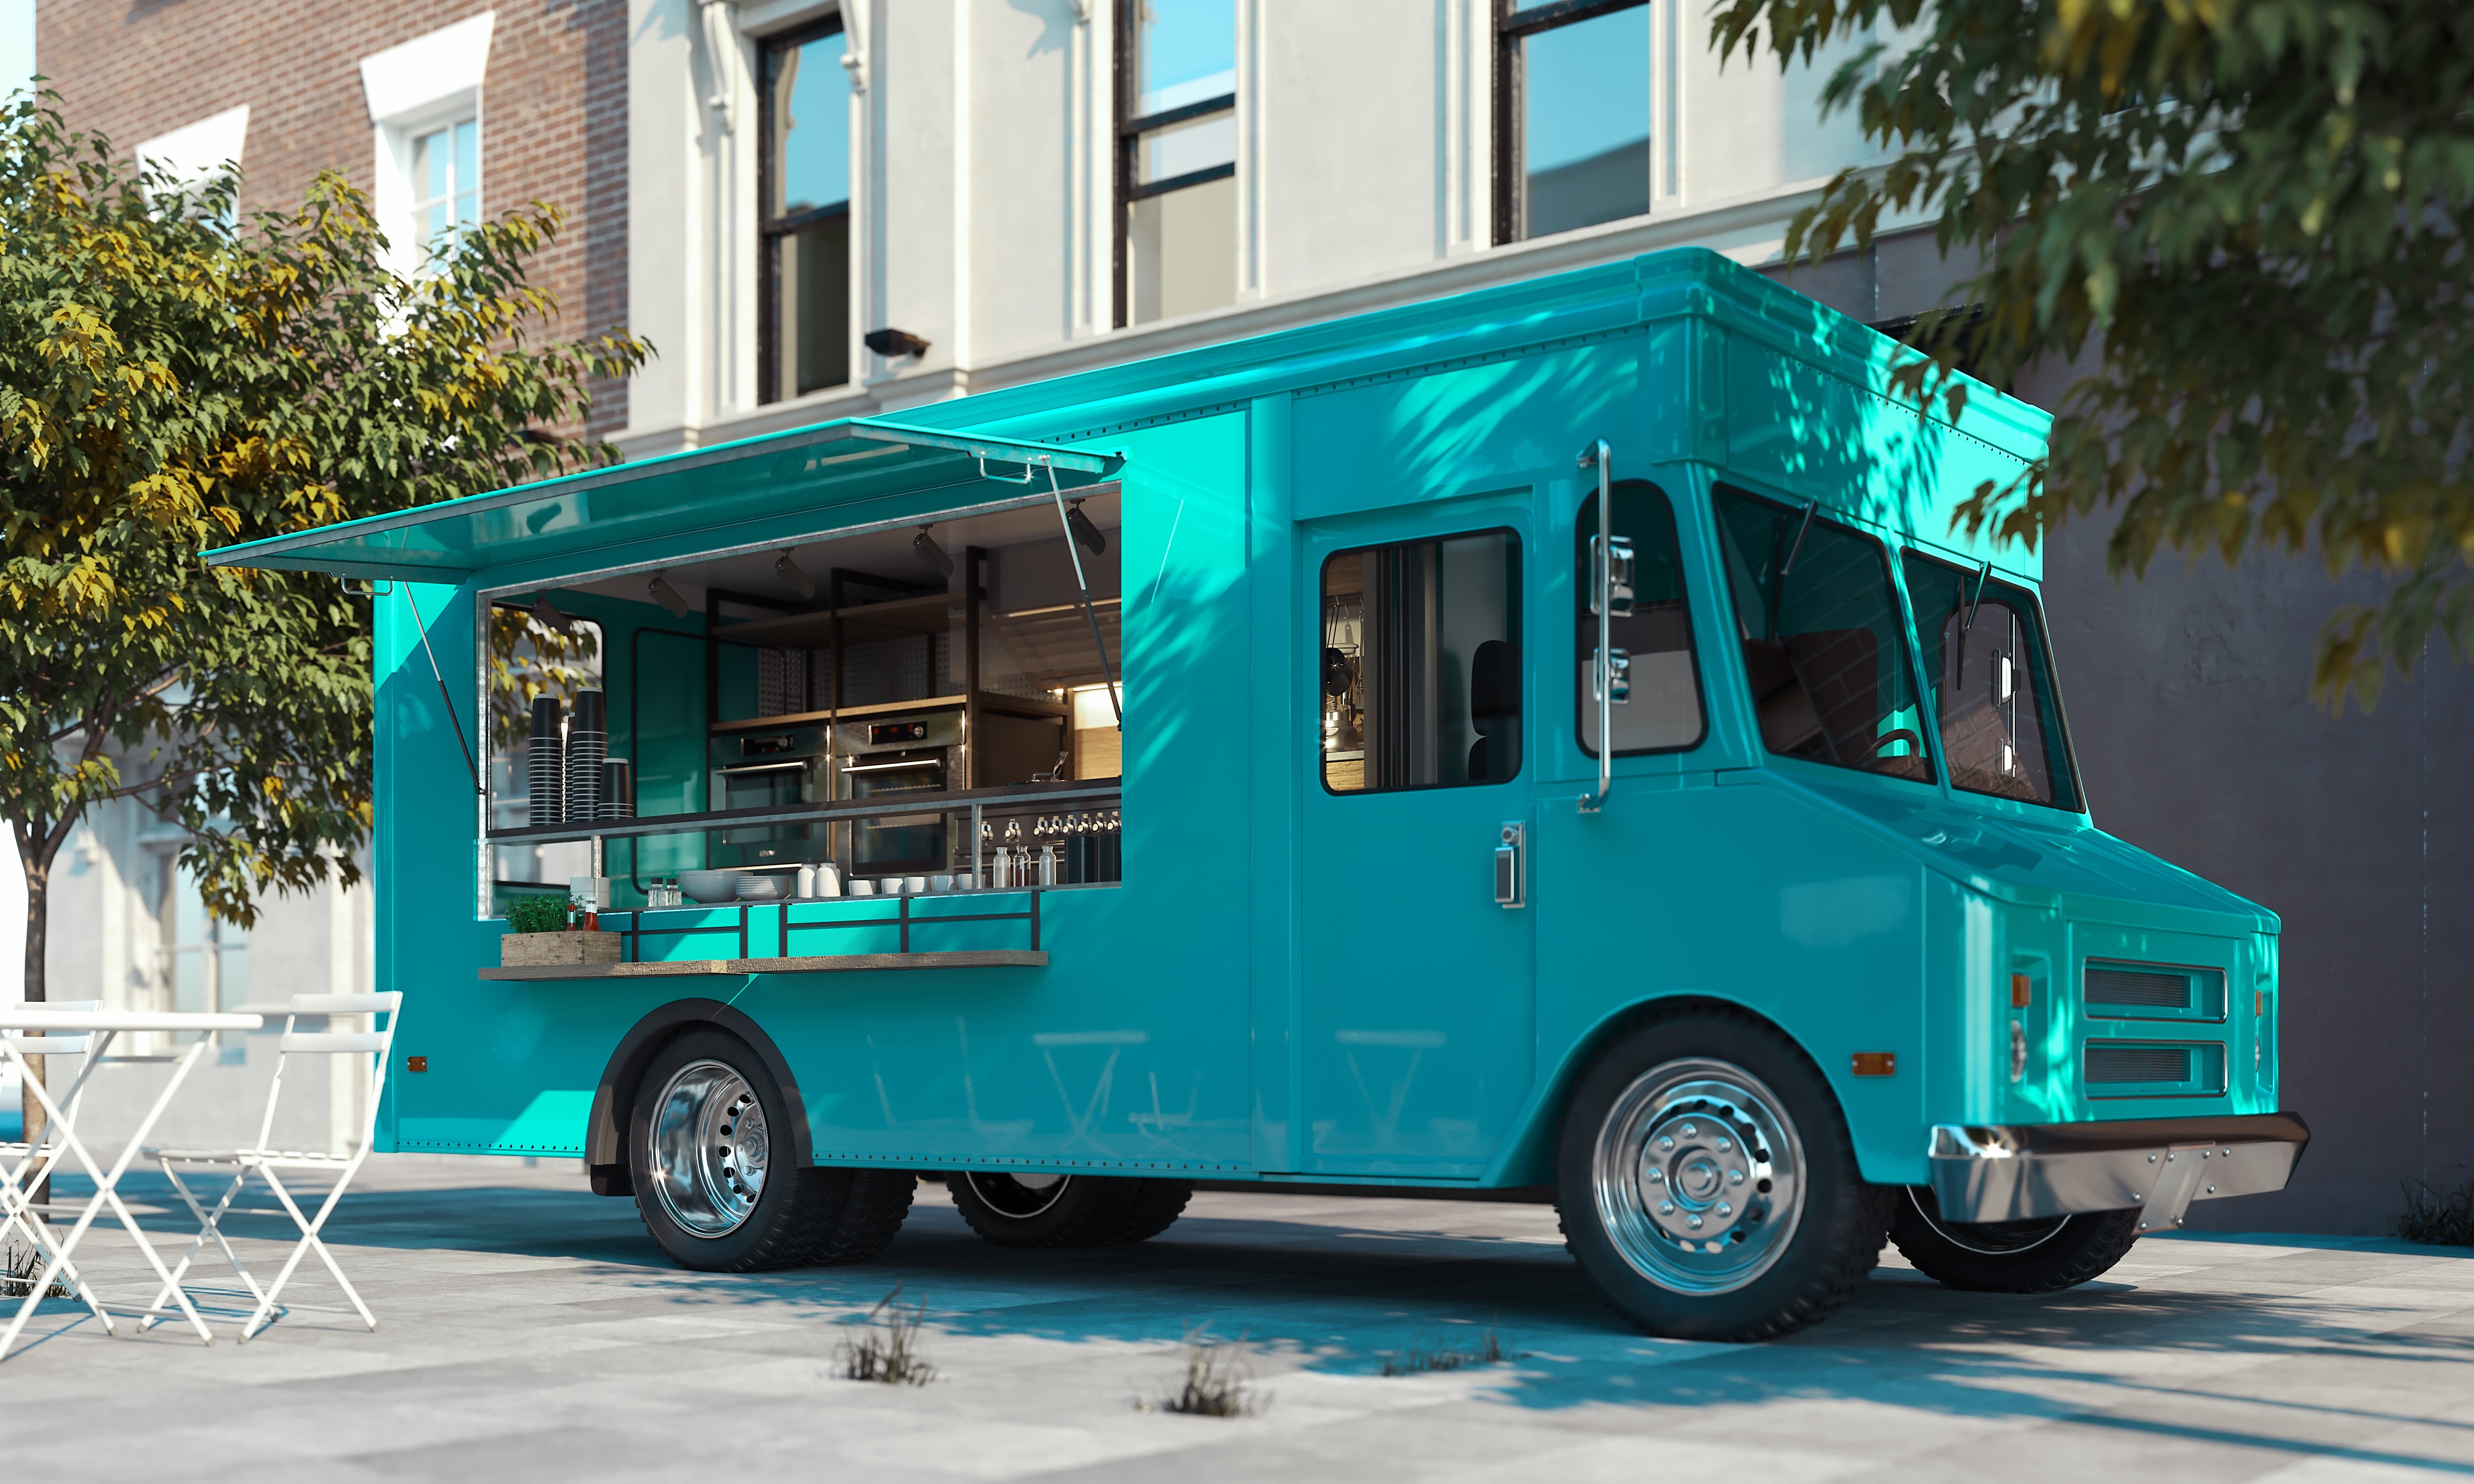 Read full post: Navigating a Kitchen On Wheels: A Guide to Food Truck Codes and Safety Regulations